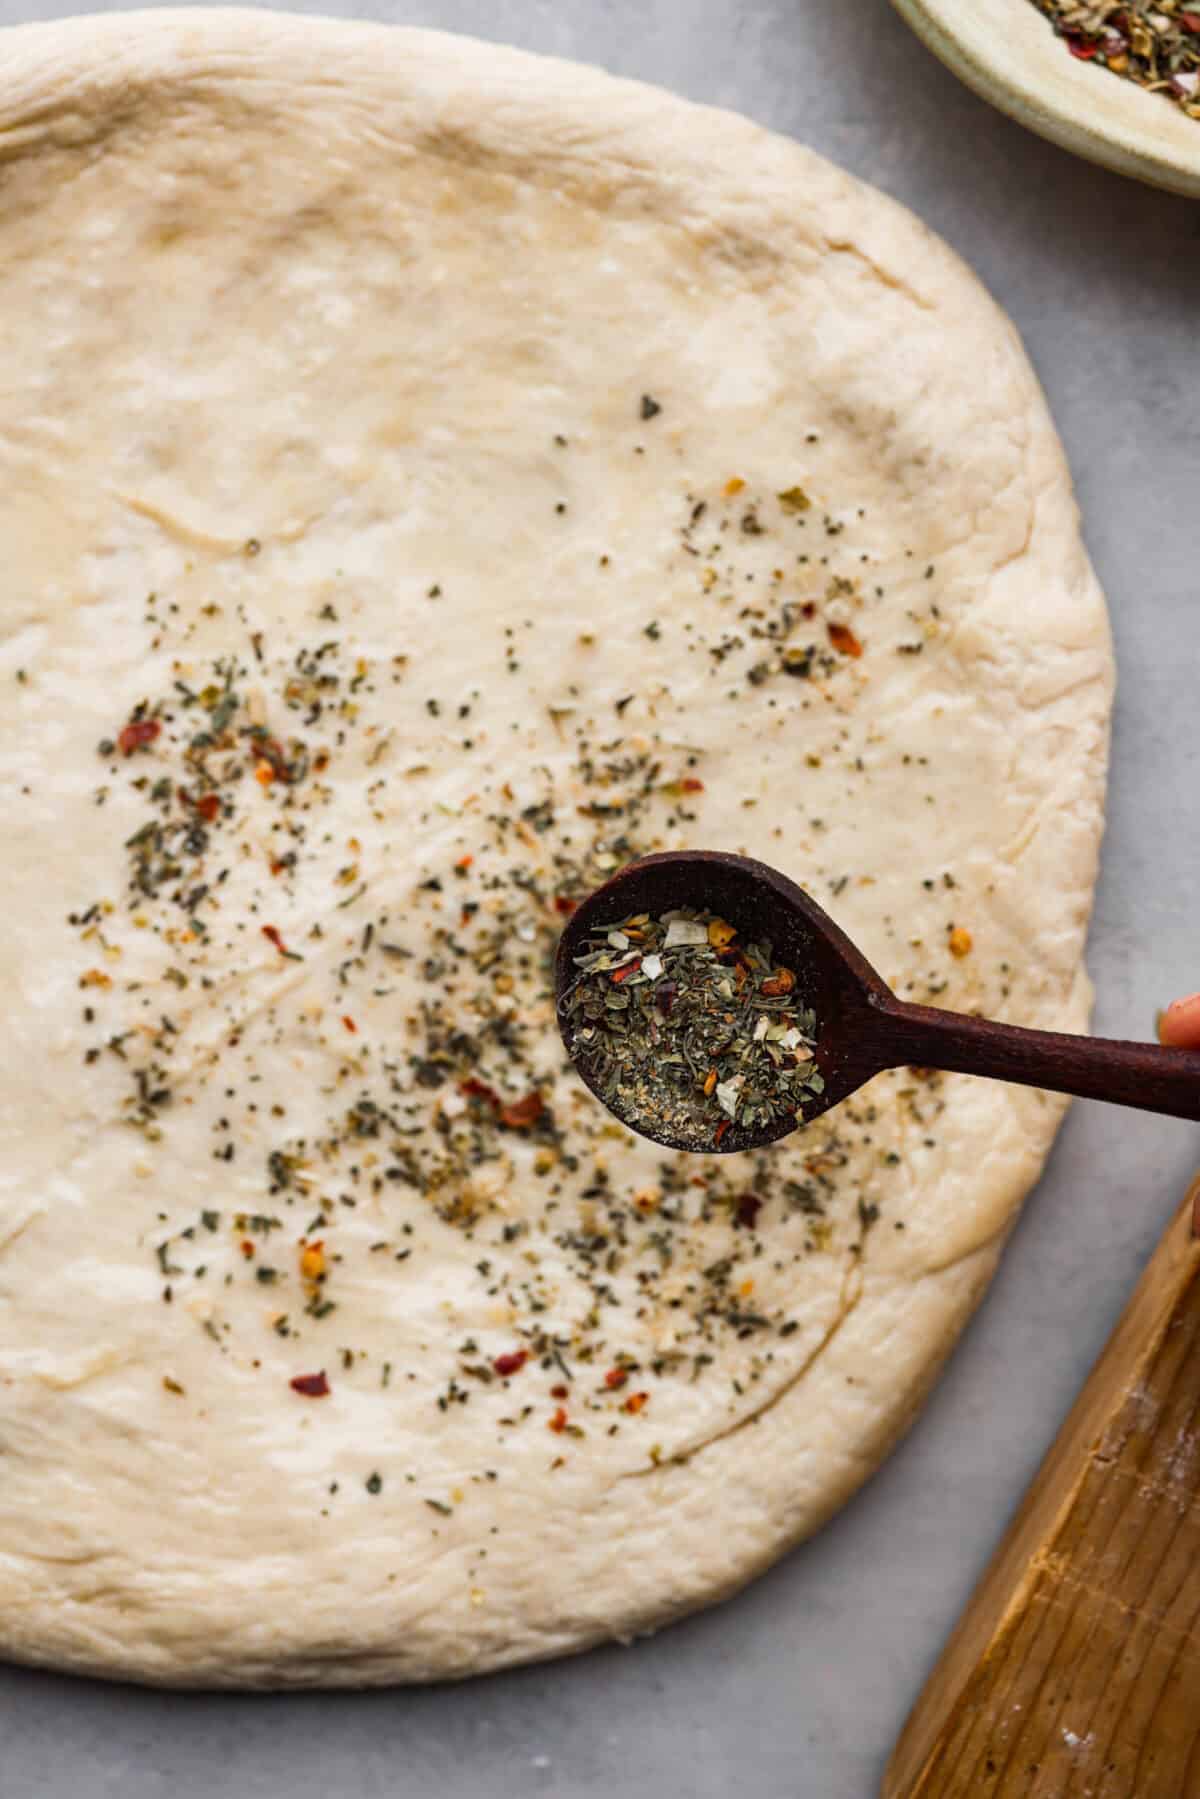 Pizza seasoning being sprinkled over dough.